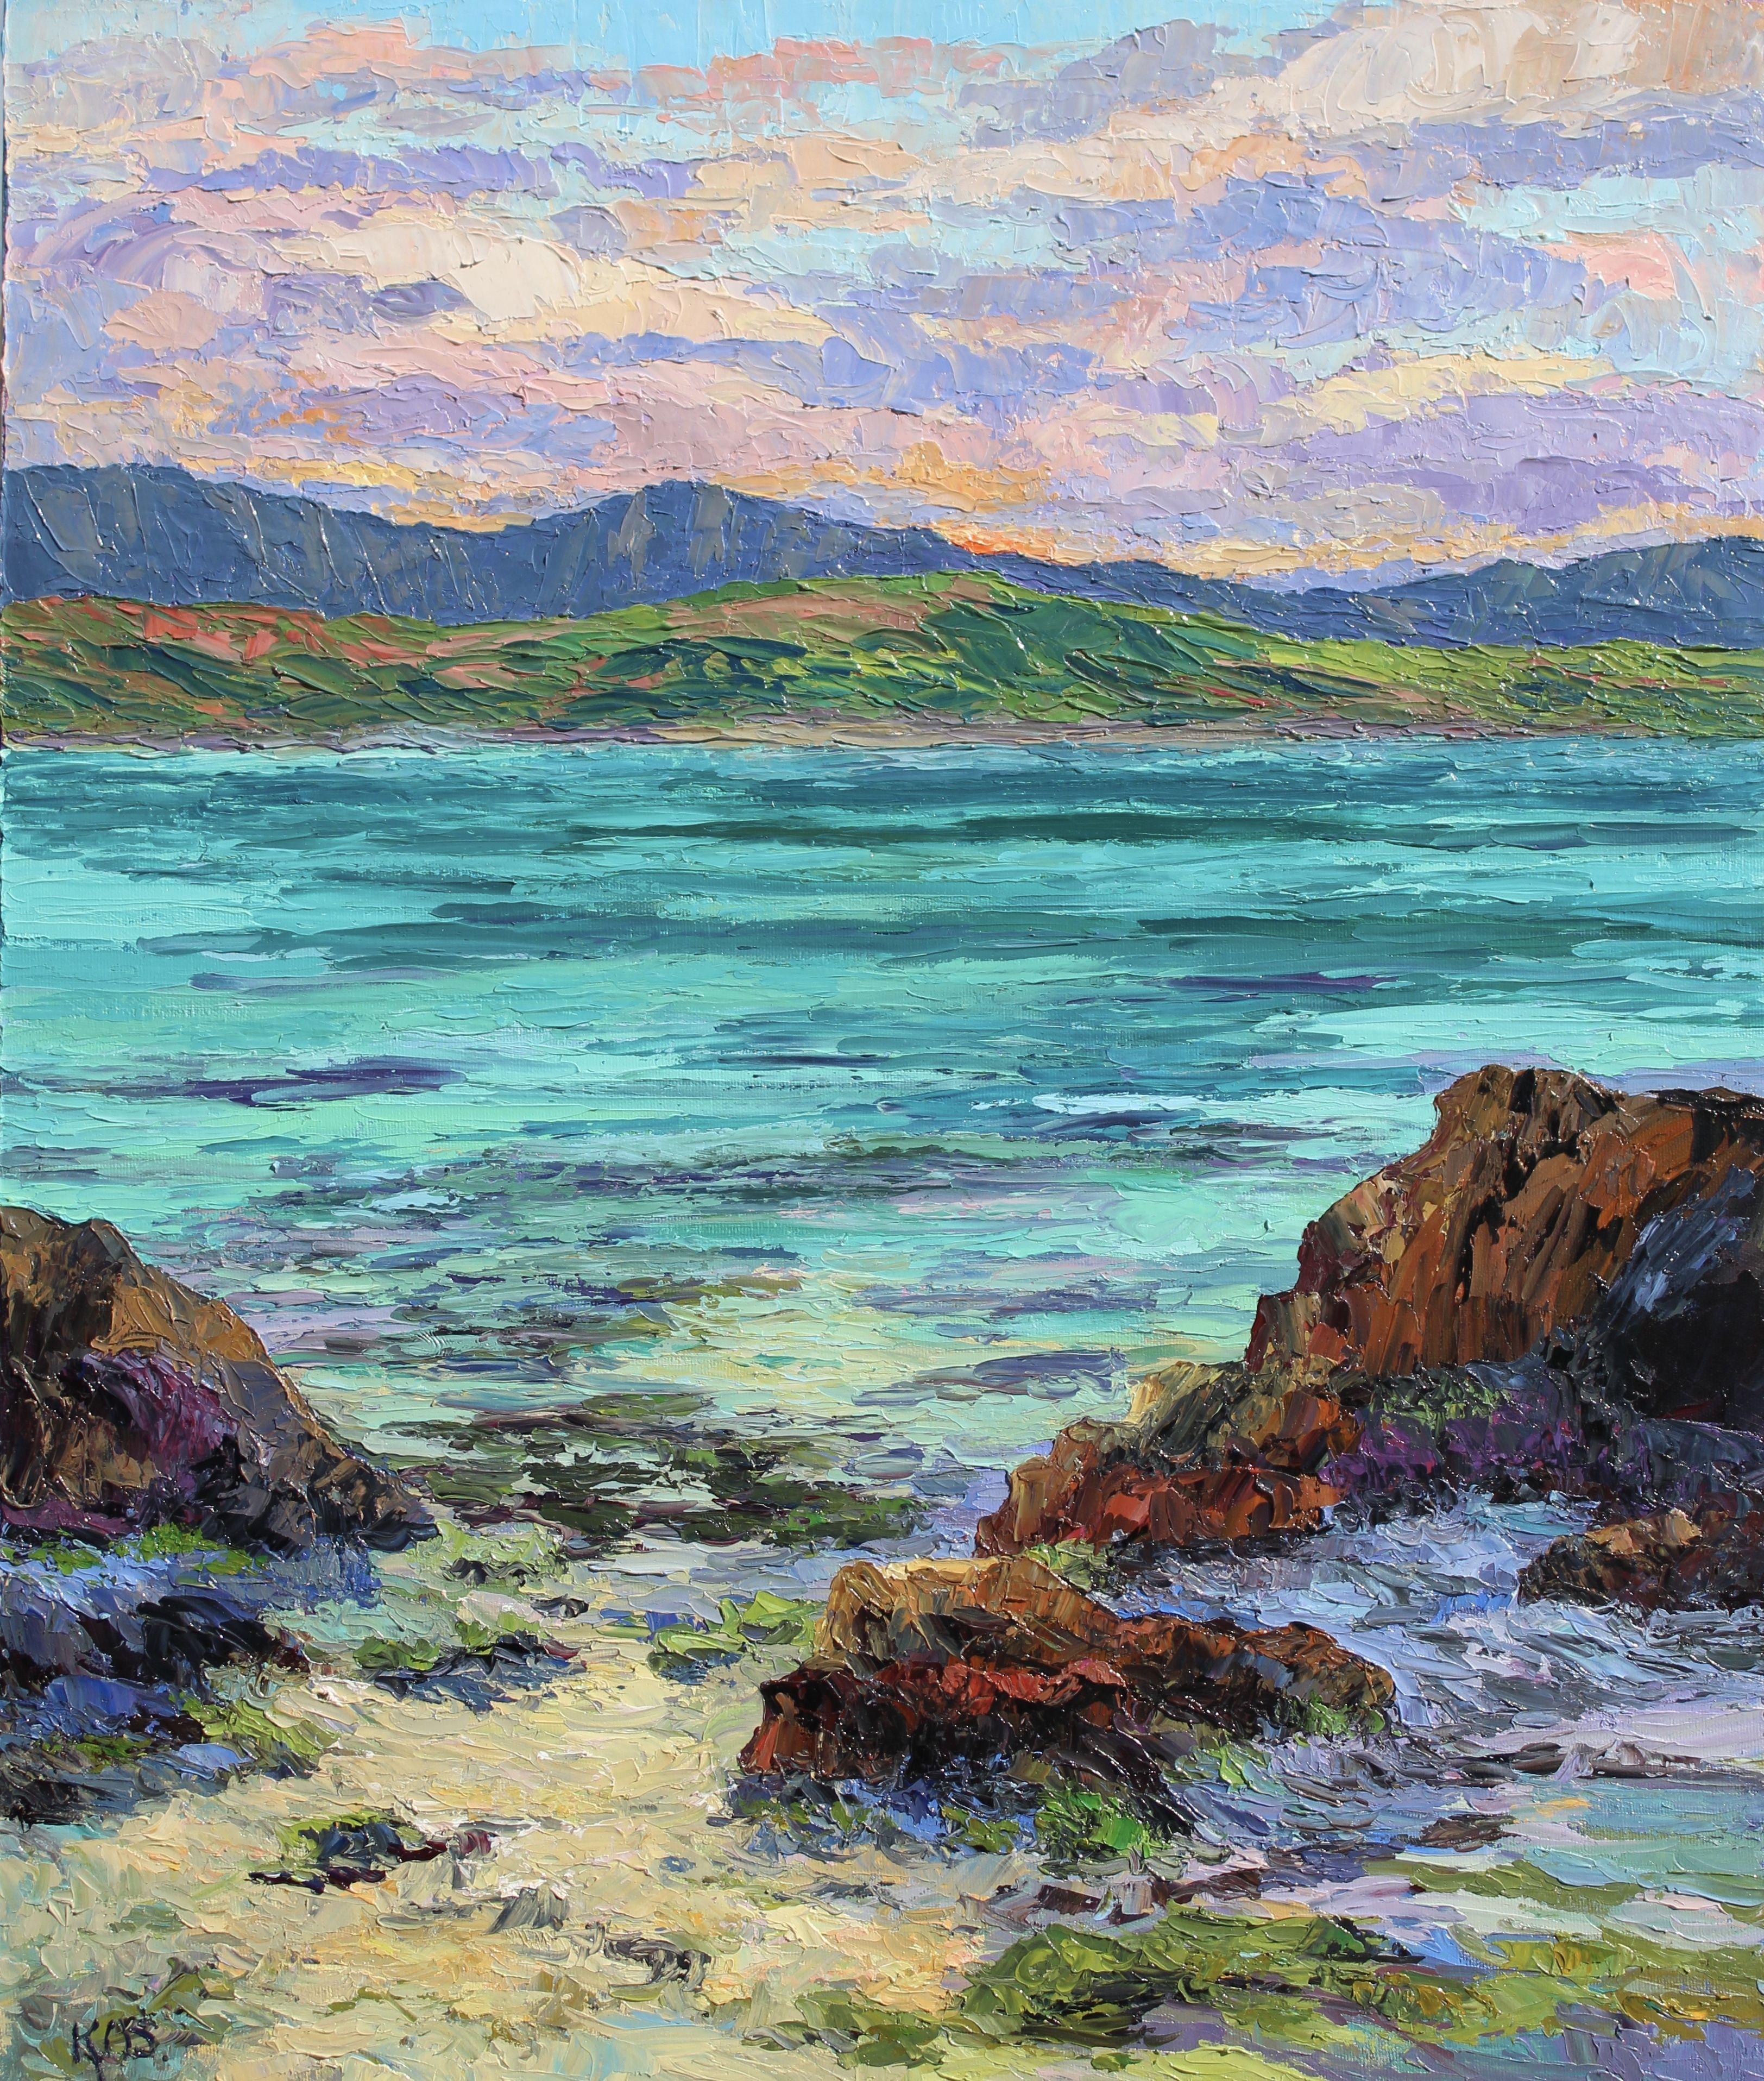 An original palette knife oil painting of Kailua Beach in Hawaii. This painting depicts the sun setting over the Pali (Hawaiian mountains), the evening colors cascade over the water, rocks and sand. The turquoise water invites the viewer to take an